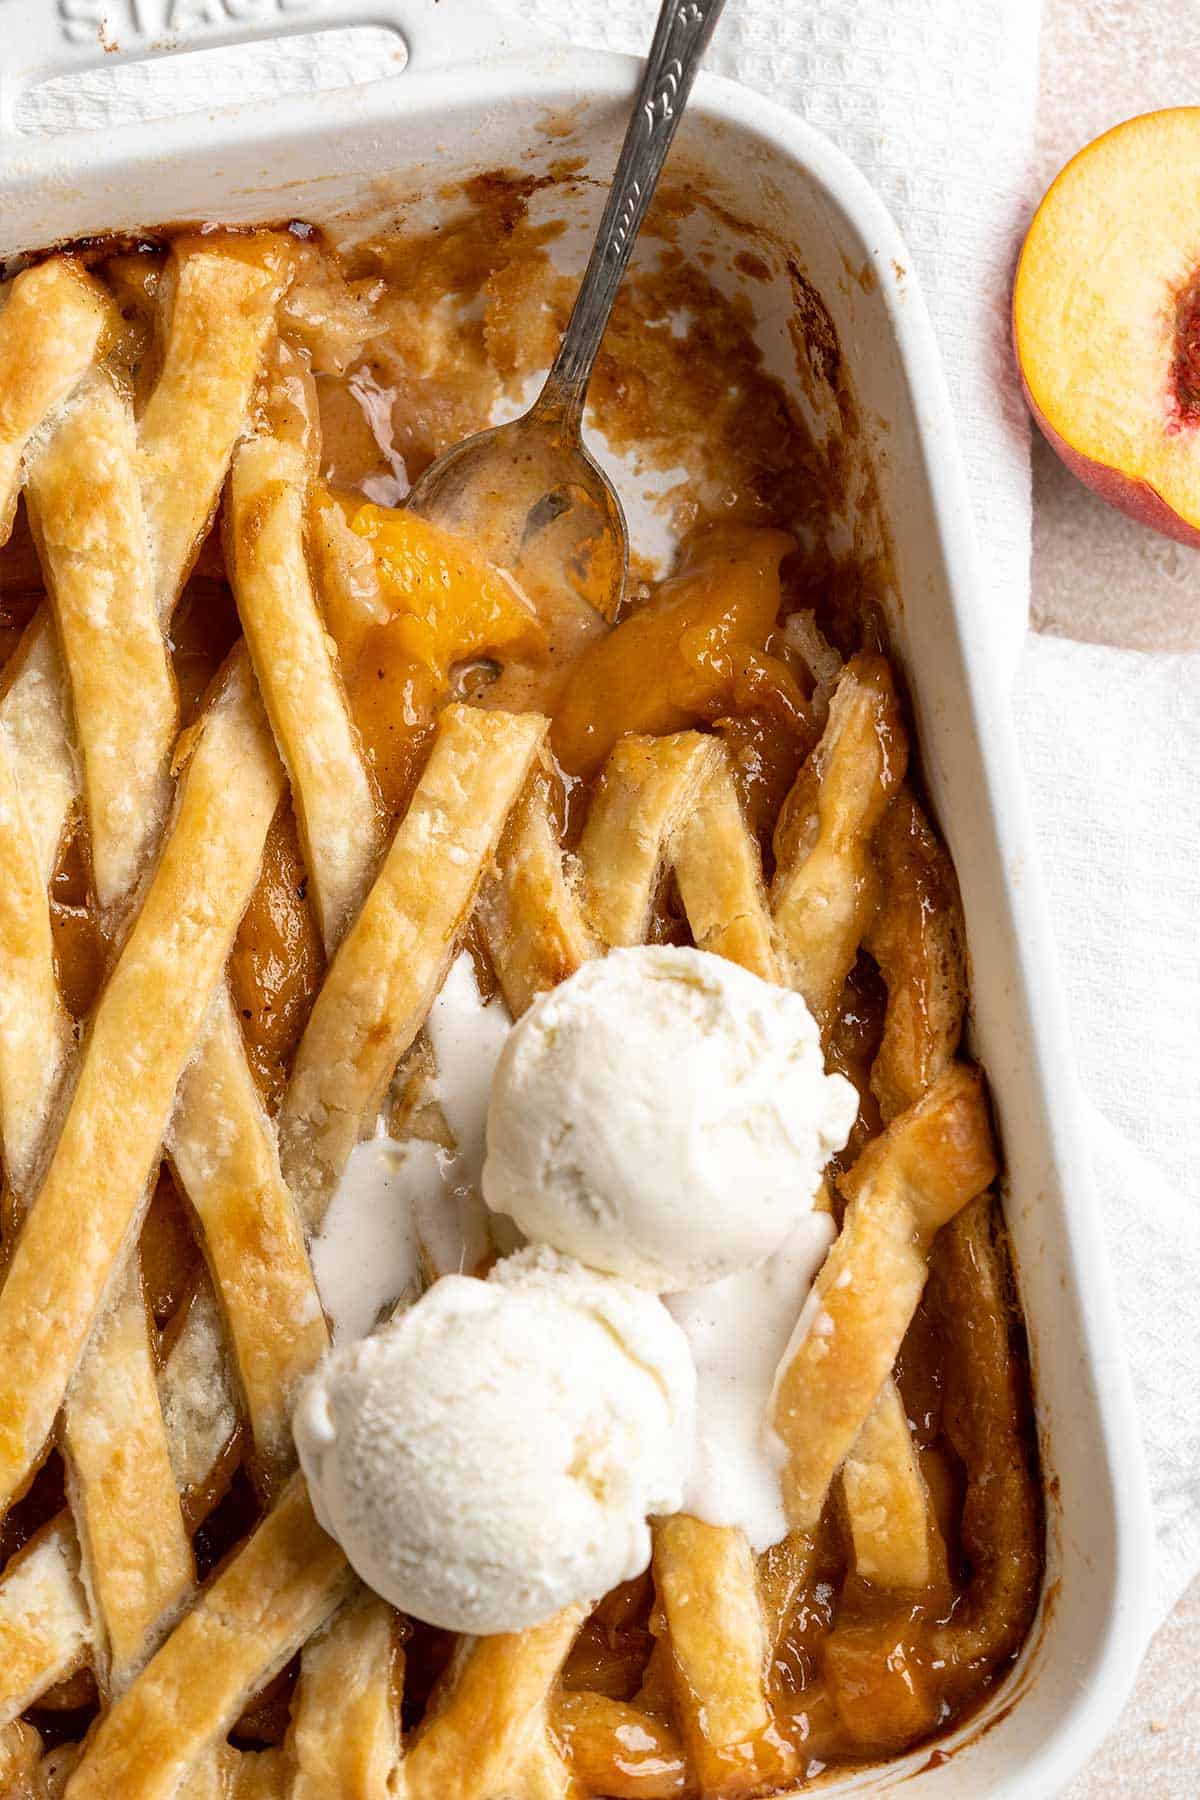 Peach cobbler with canned peaches in a baking dish with a portion missing and the spoon in the dish.